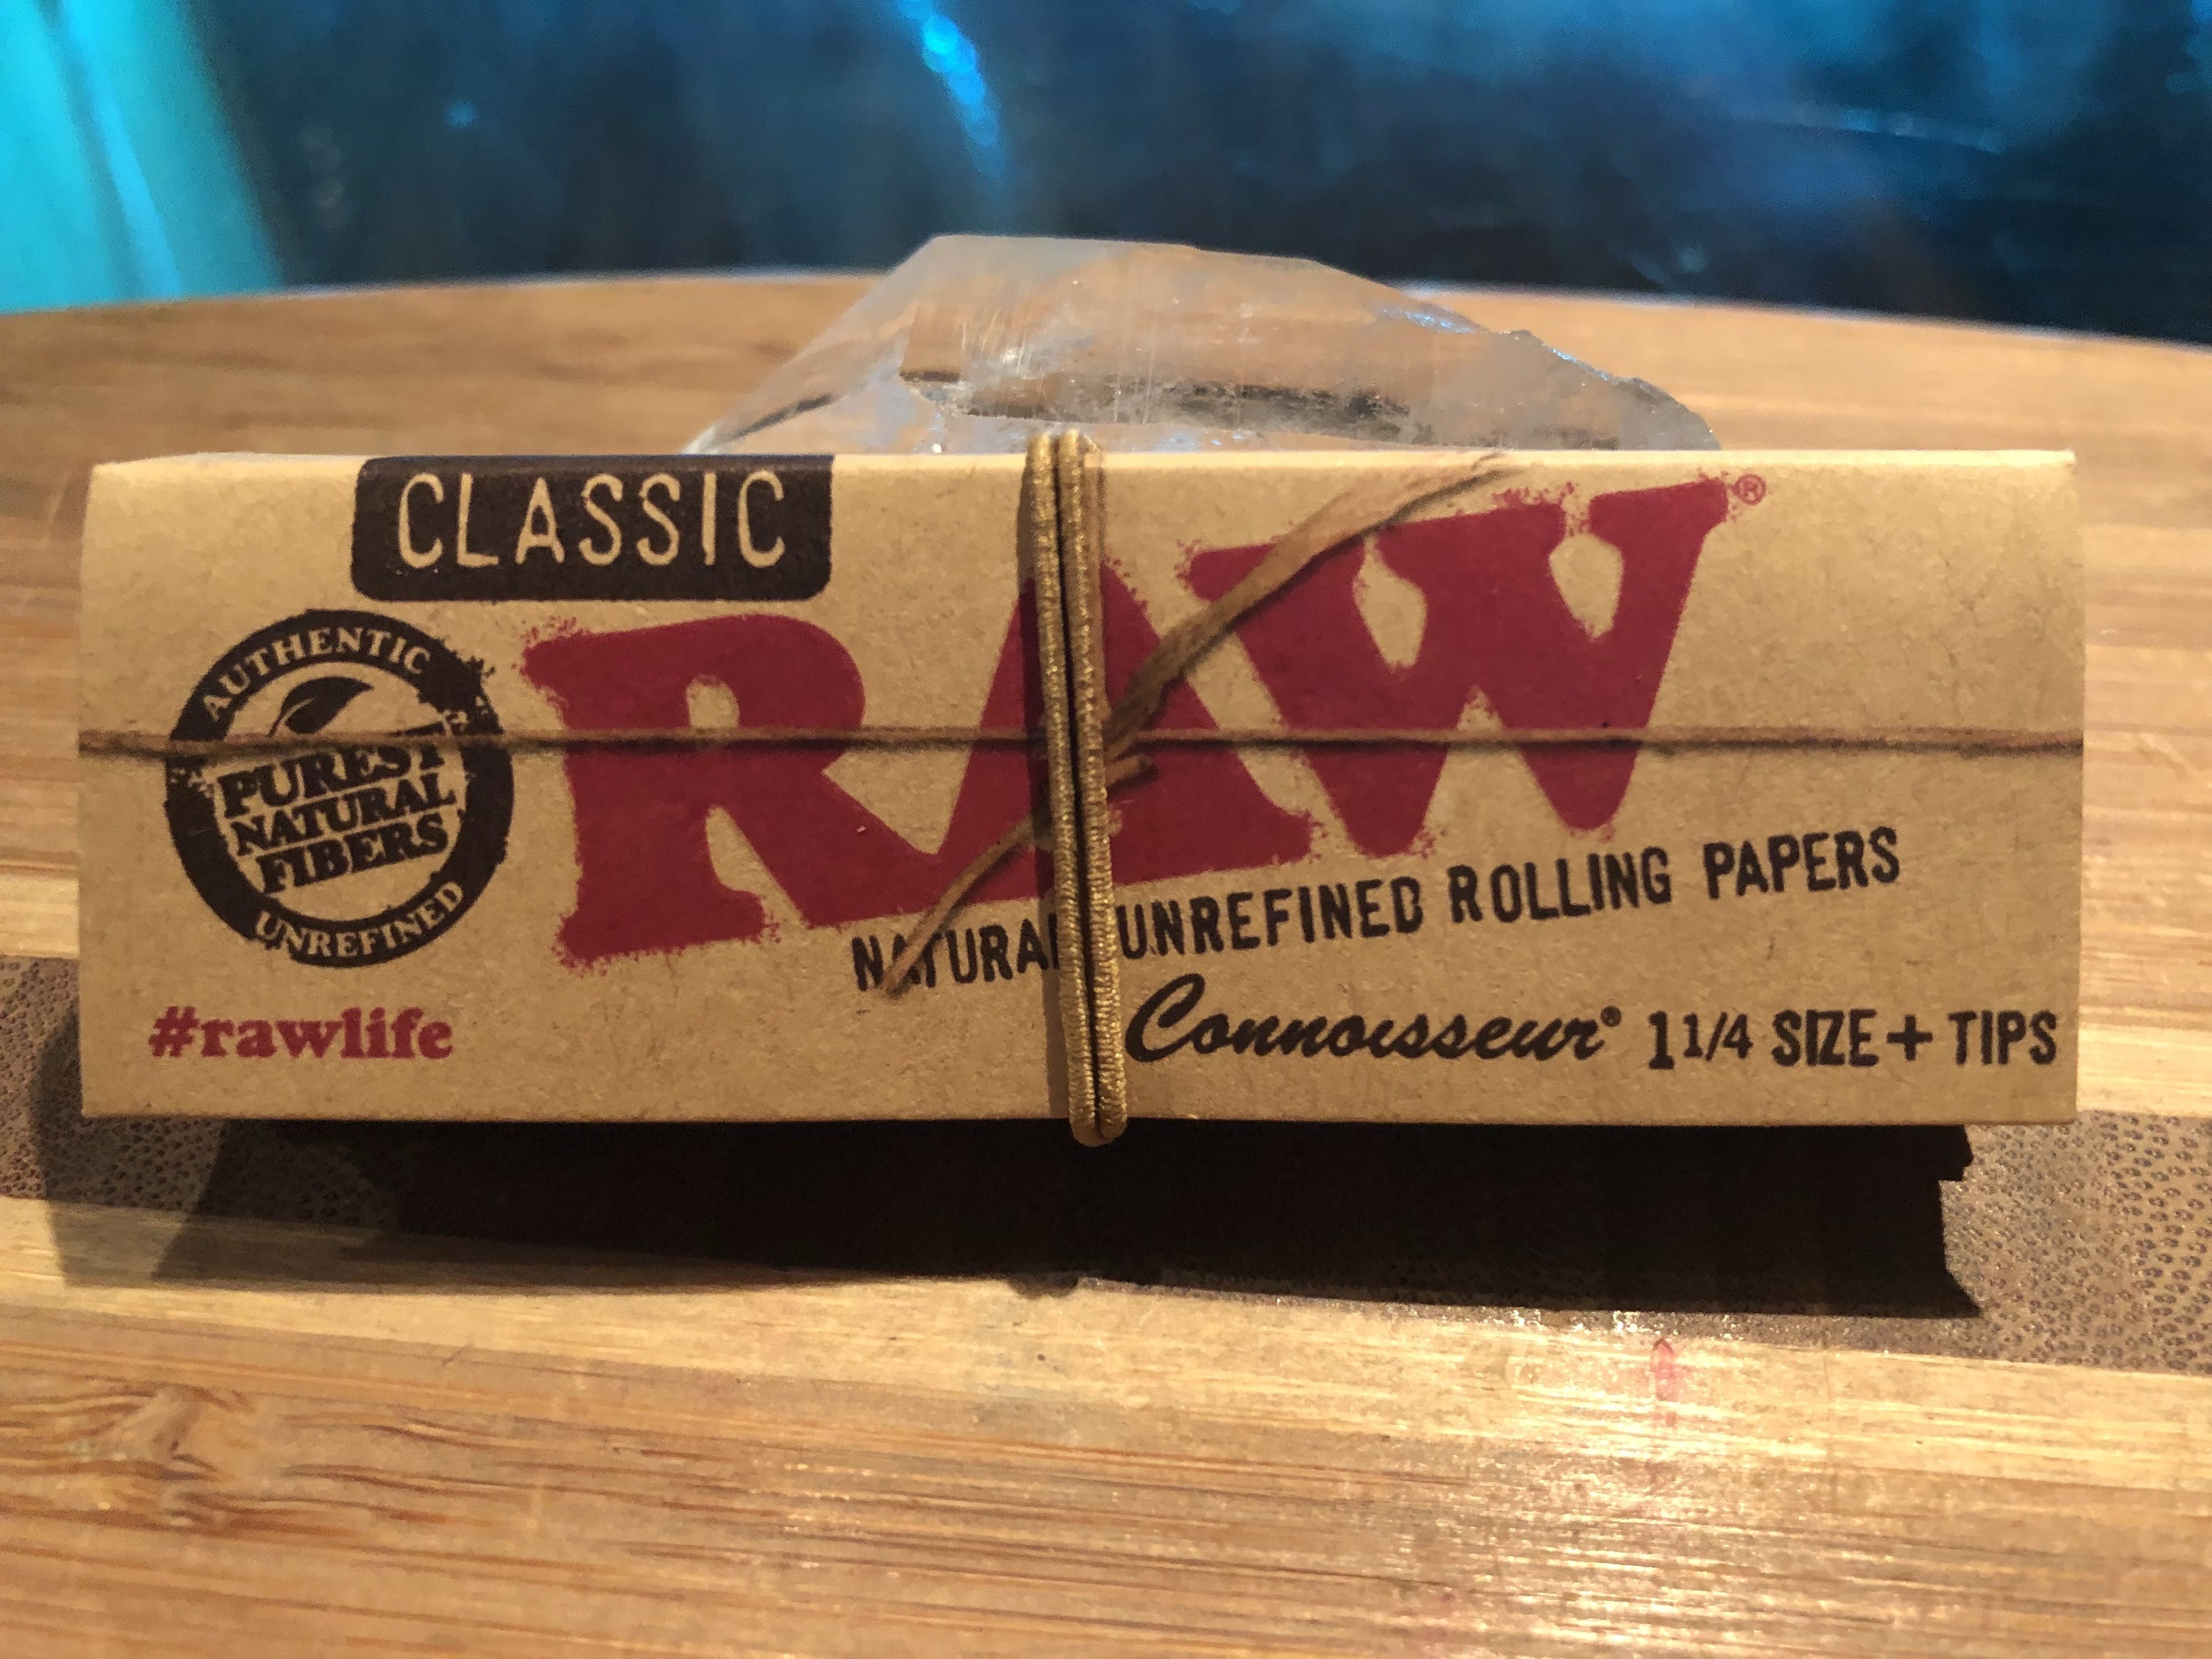 marijuana-dispensaries-22775-pacific-coast-highway-malibu-raw-classic-connoiseur-1-14-rolling-papers-with-tips